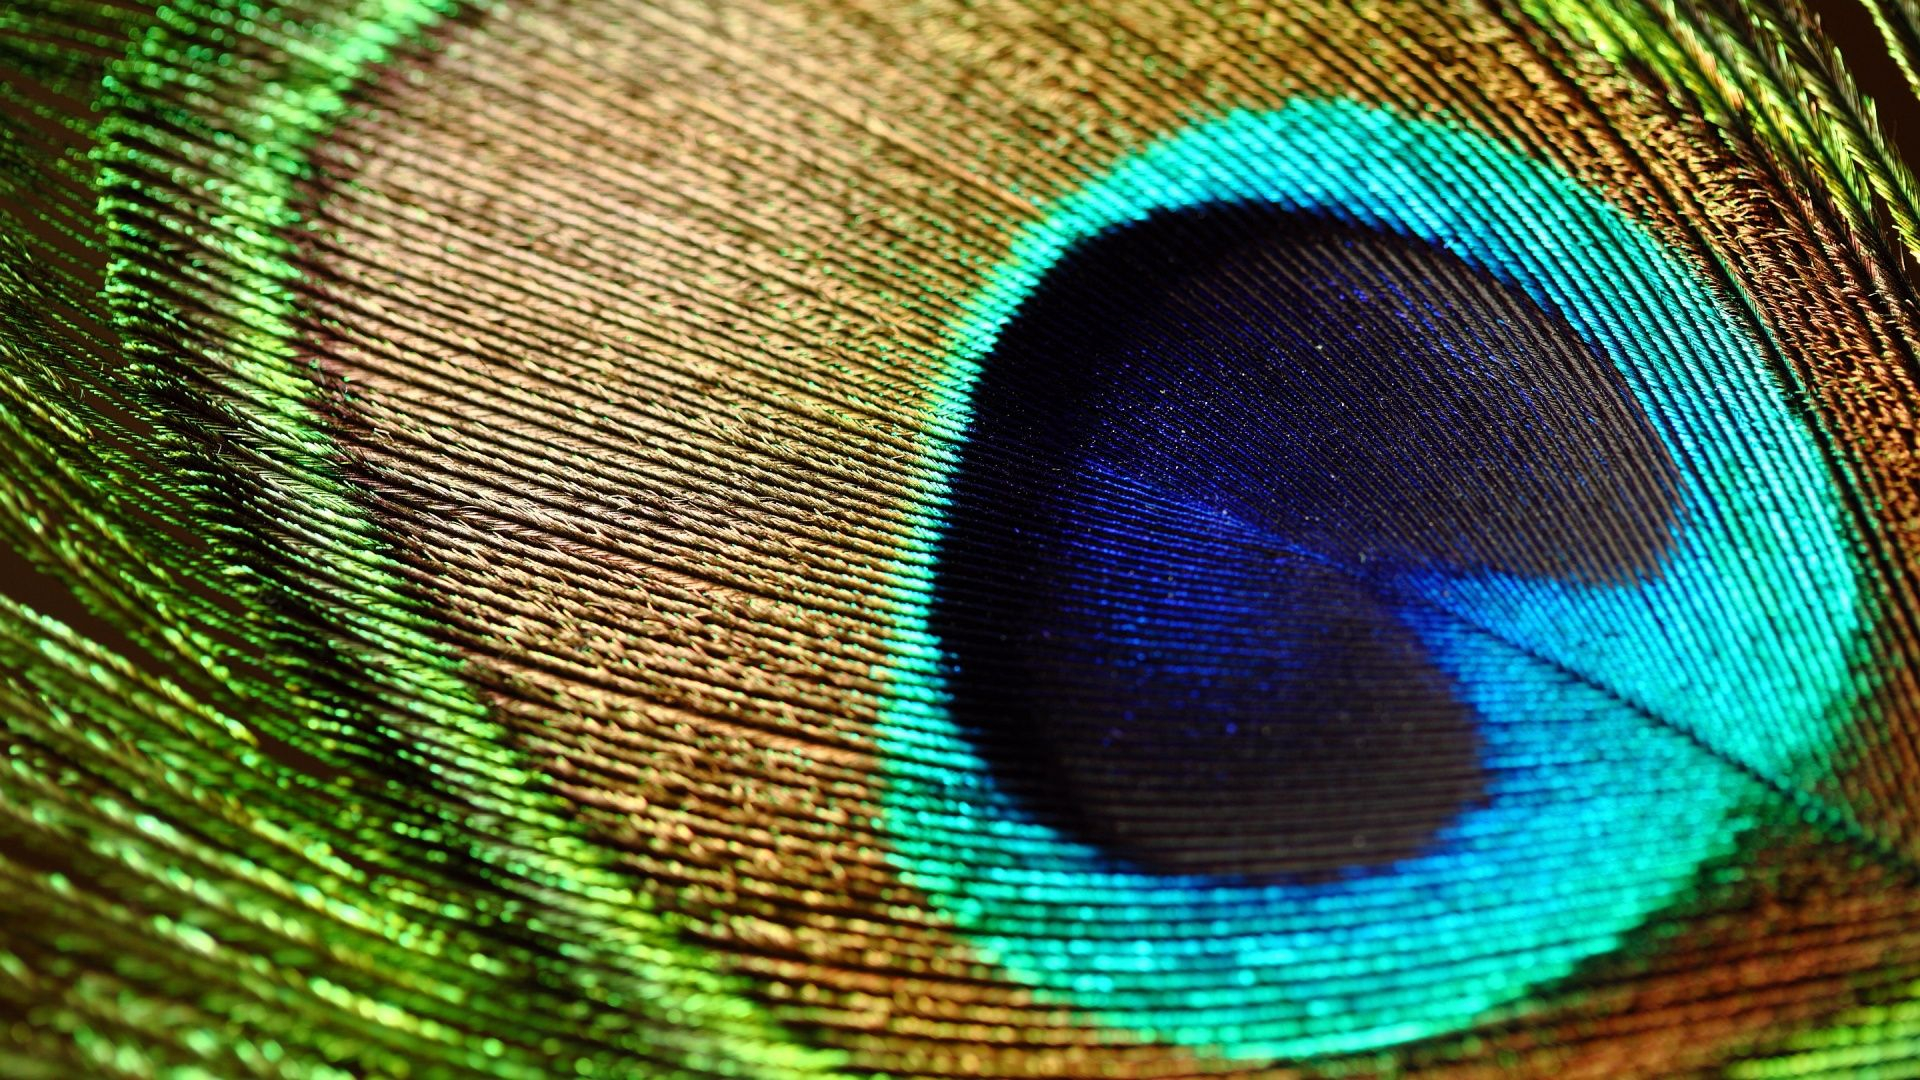 1920x1080 peacock feather [1920X1080] | Feather wallpaper, Beautiful wallpaper hd, Peacock feathers